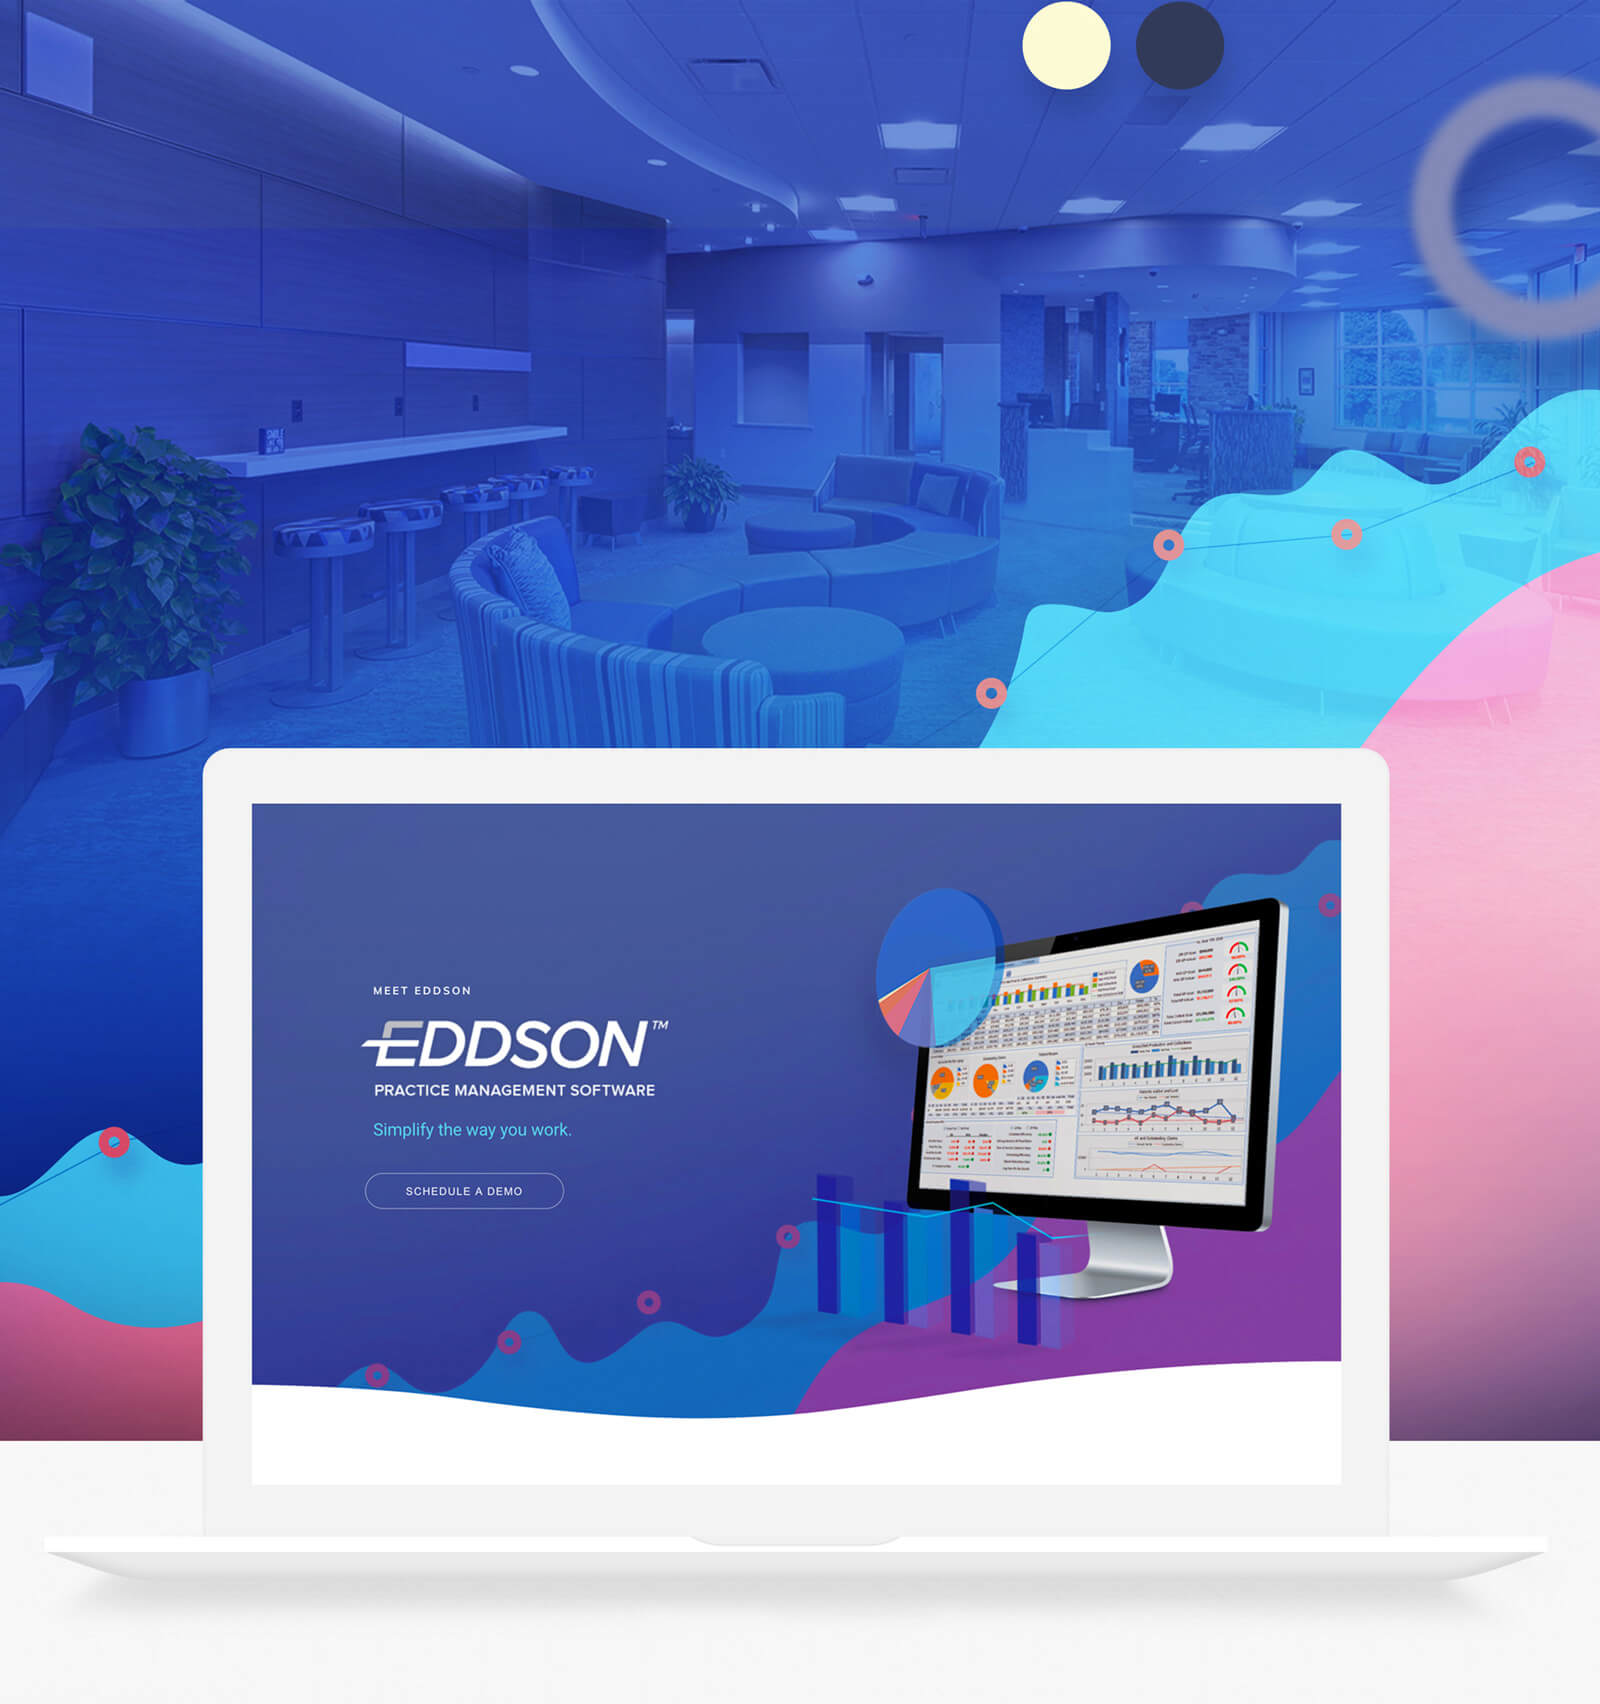 EDDSON Landing Page Styled